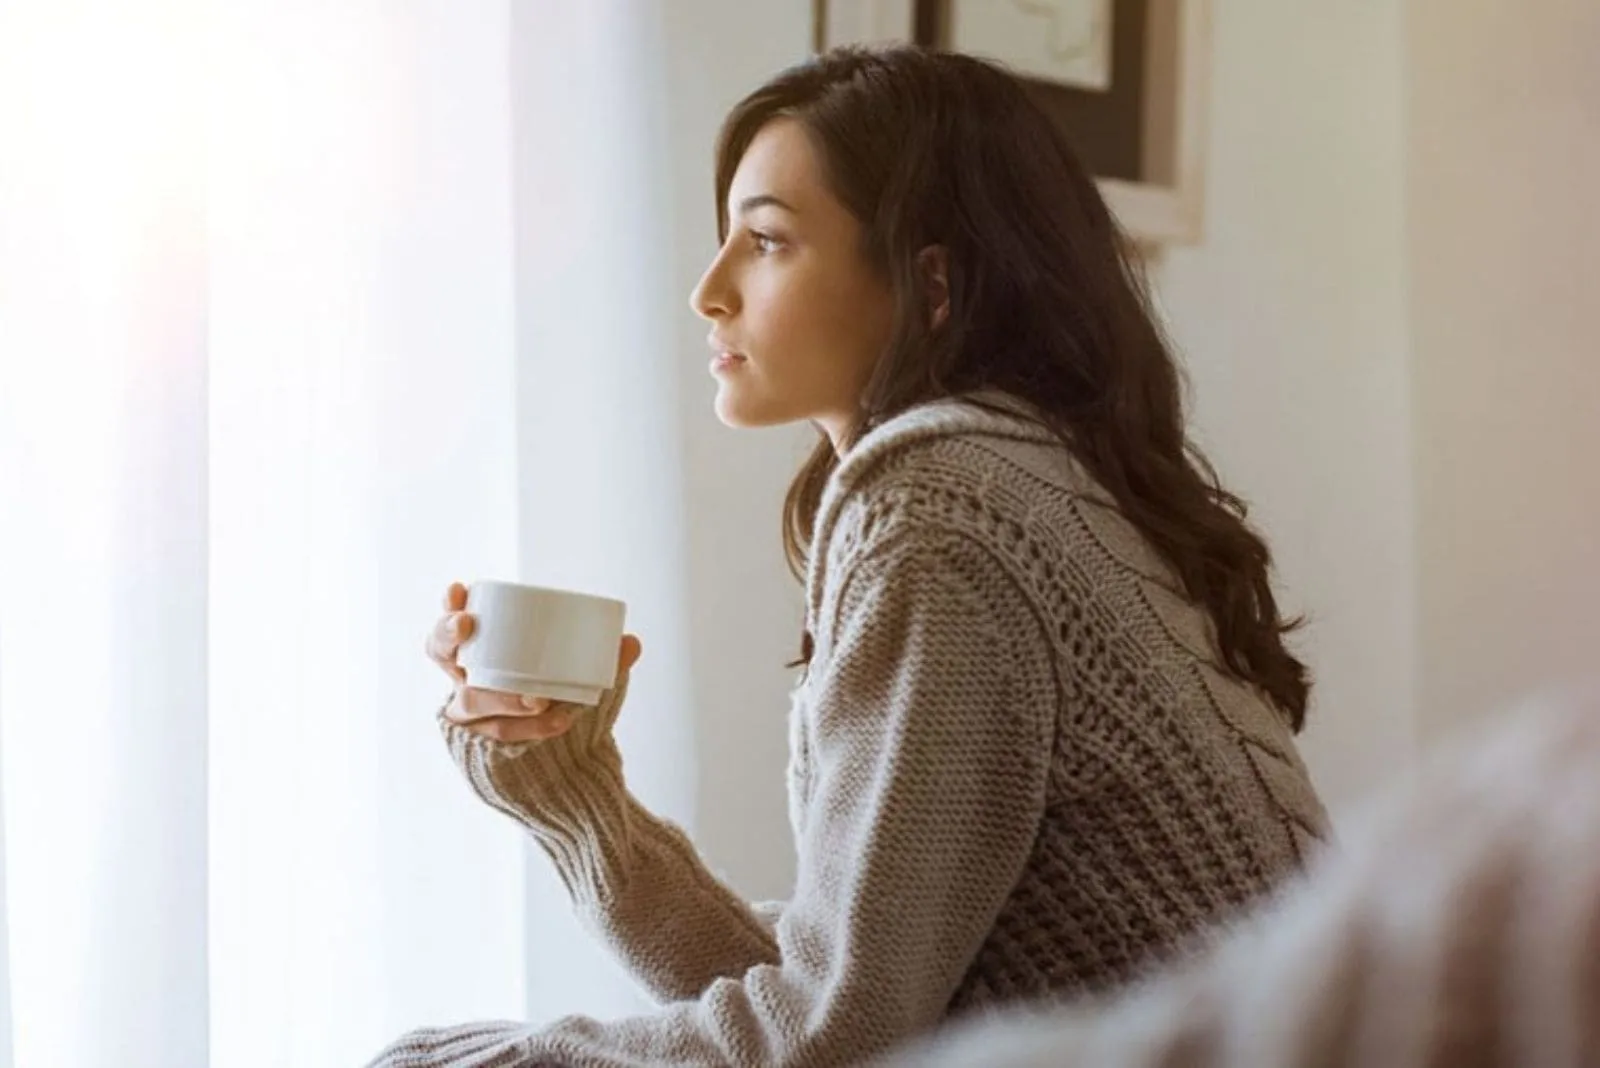 sideview of a young woman drinking coffee inside home looking out near the window pensively